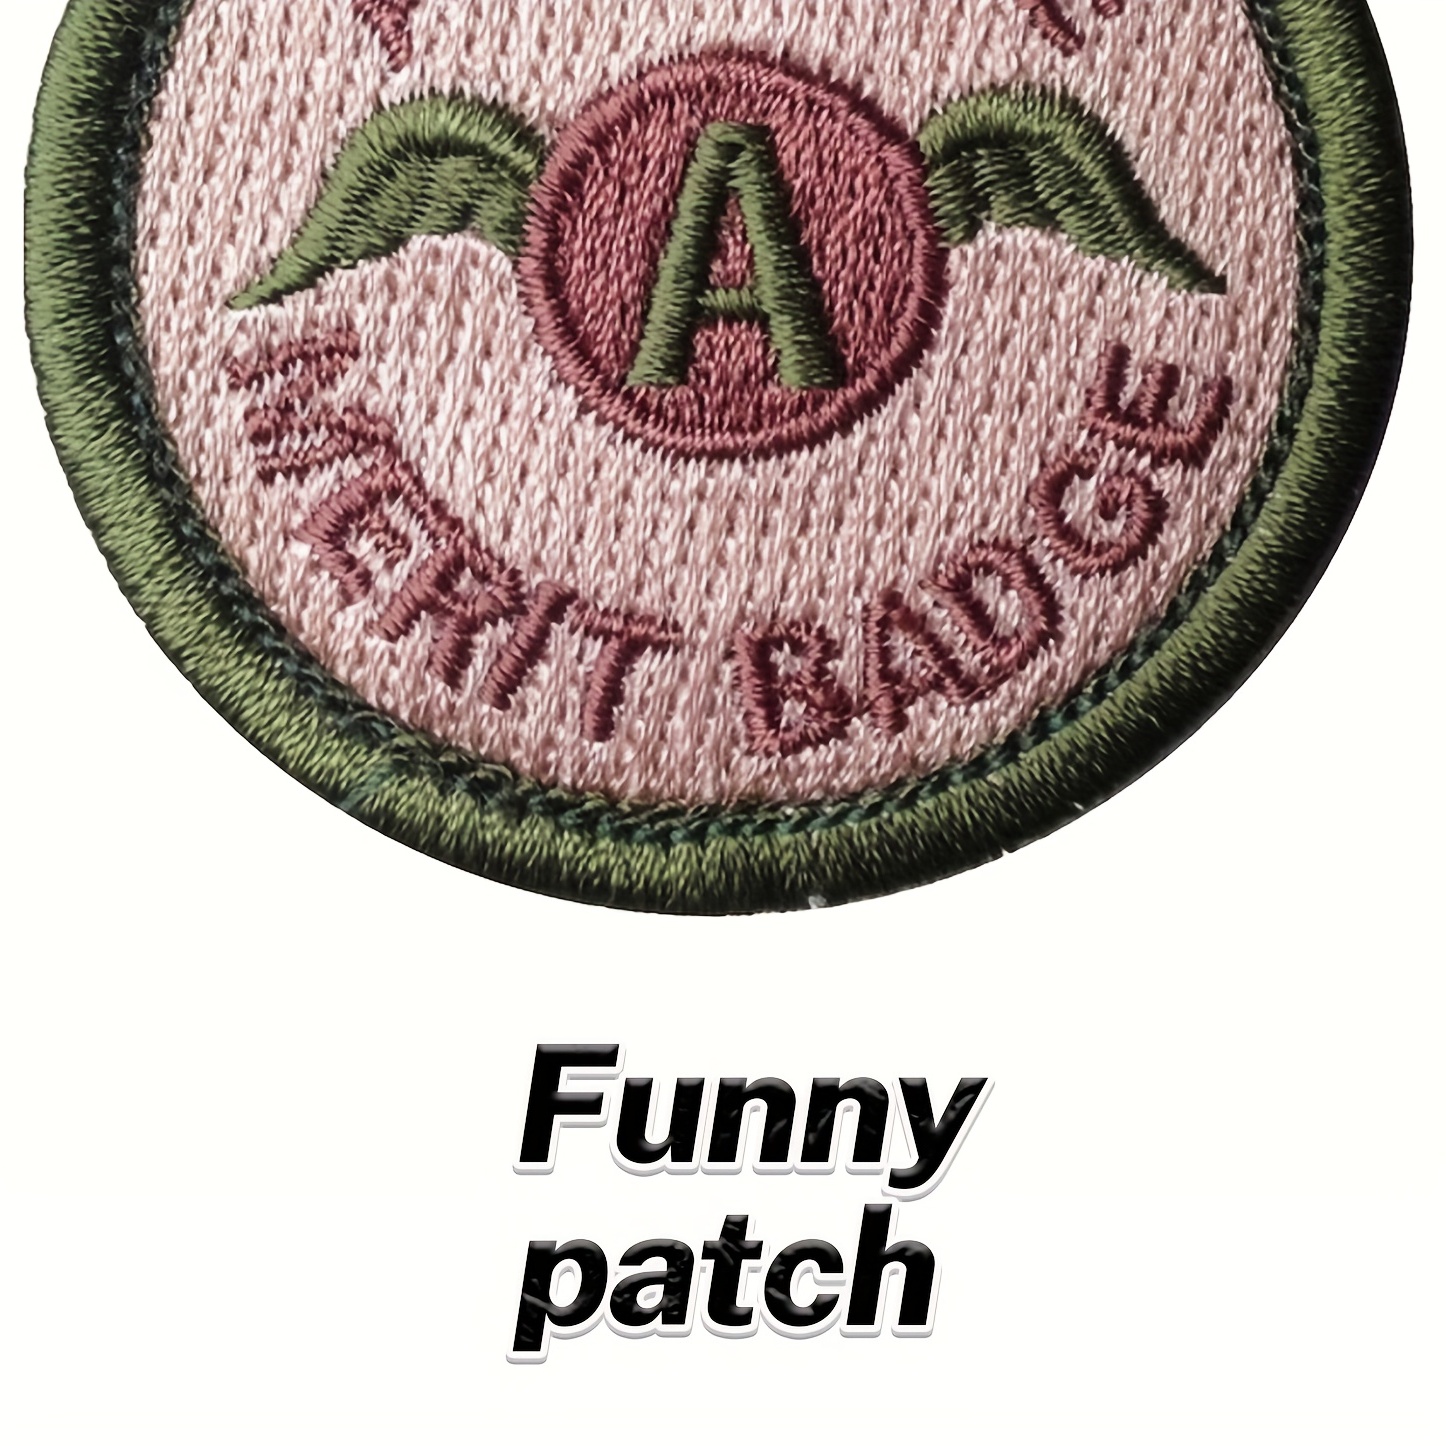 Morale-Boosting Patches - Conrad Embroidery Co.